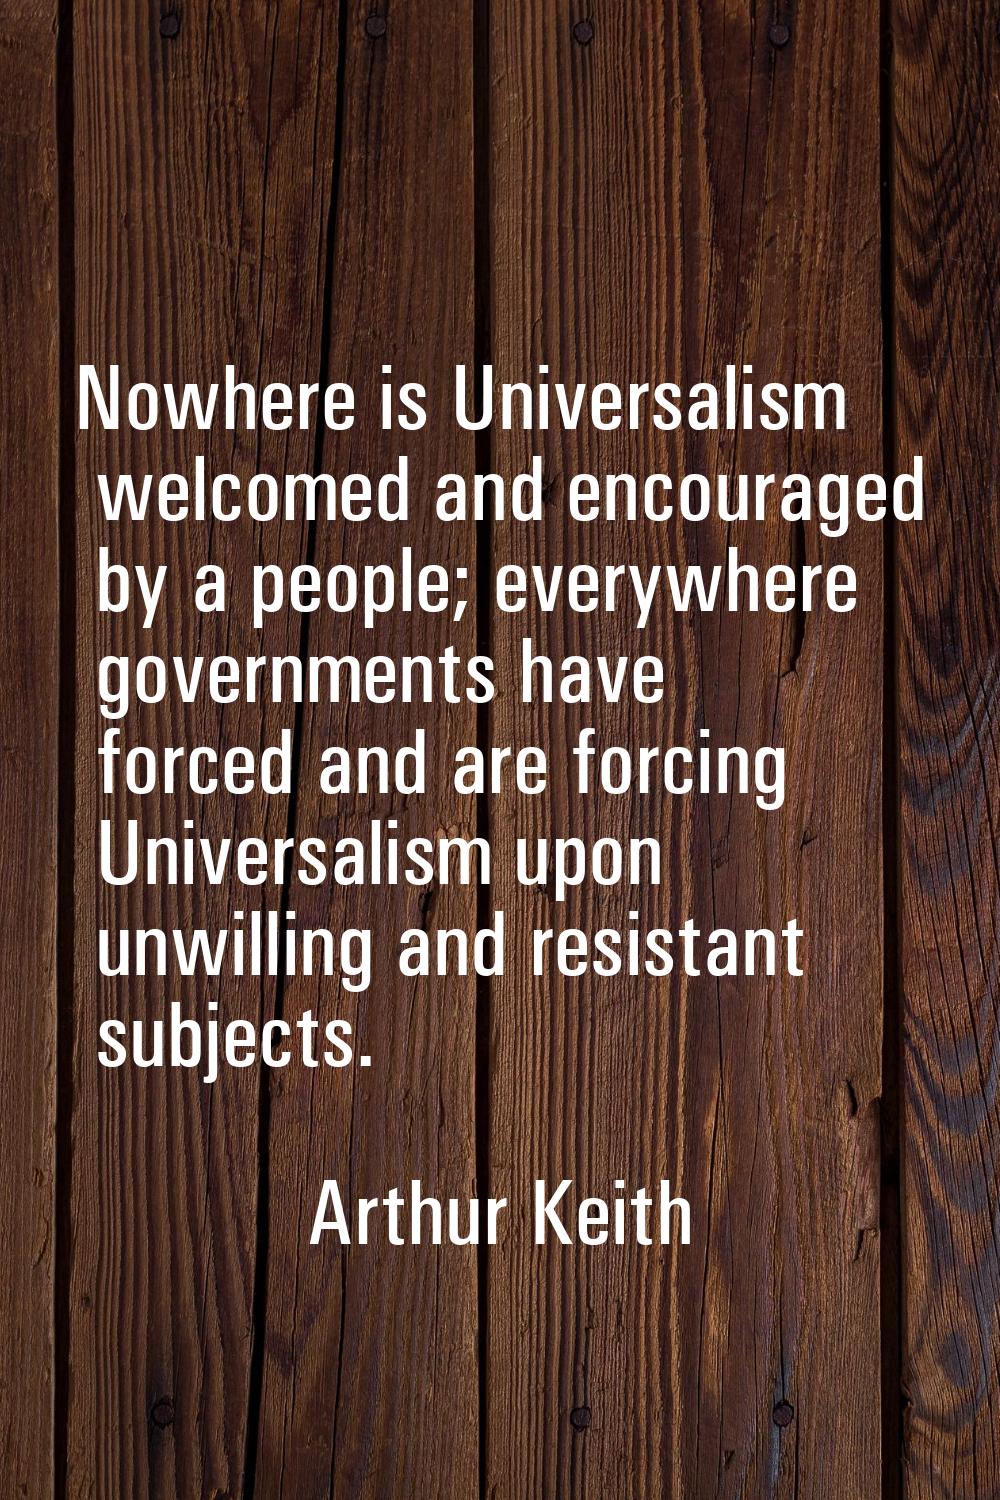 Nowhere is Universalism welcomed and encouraged by a people; everywhere governments have forced and